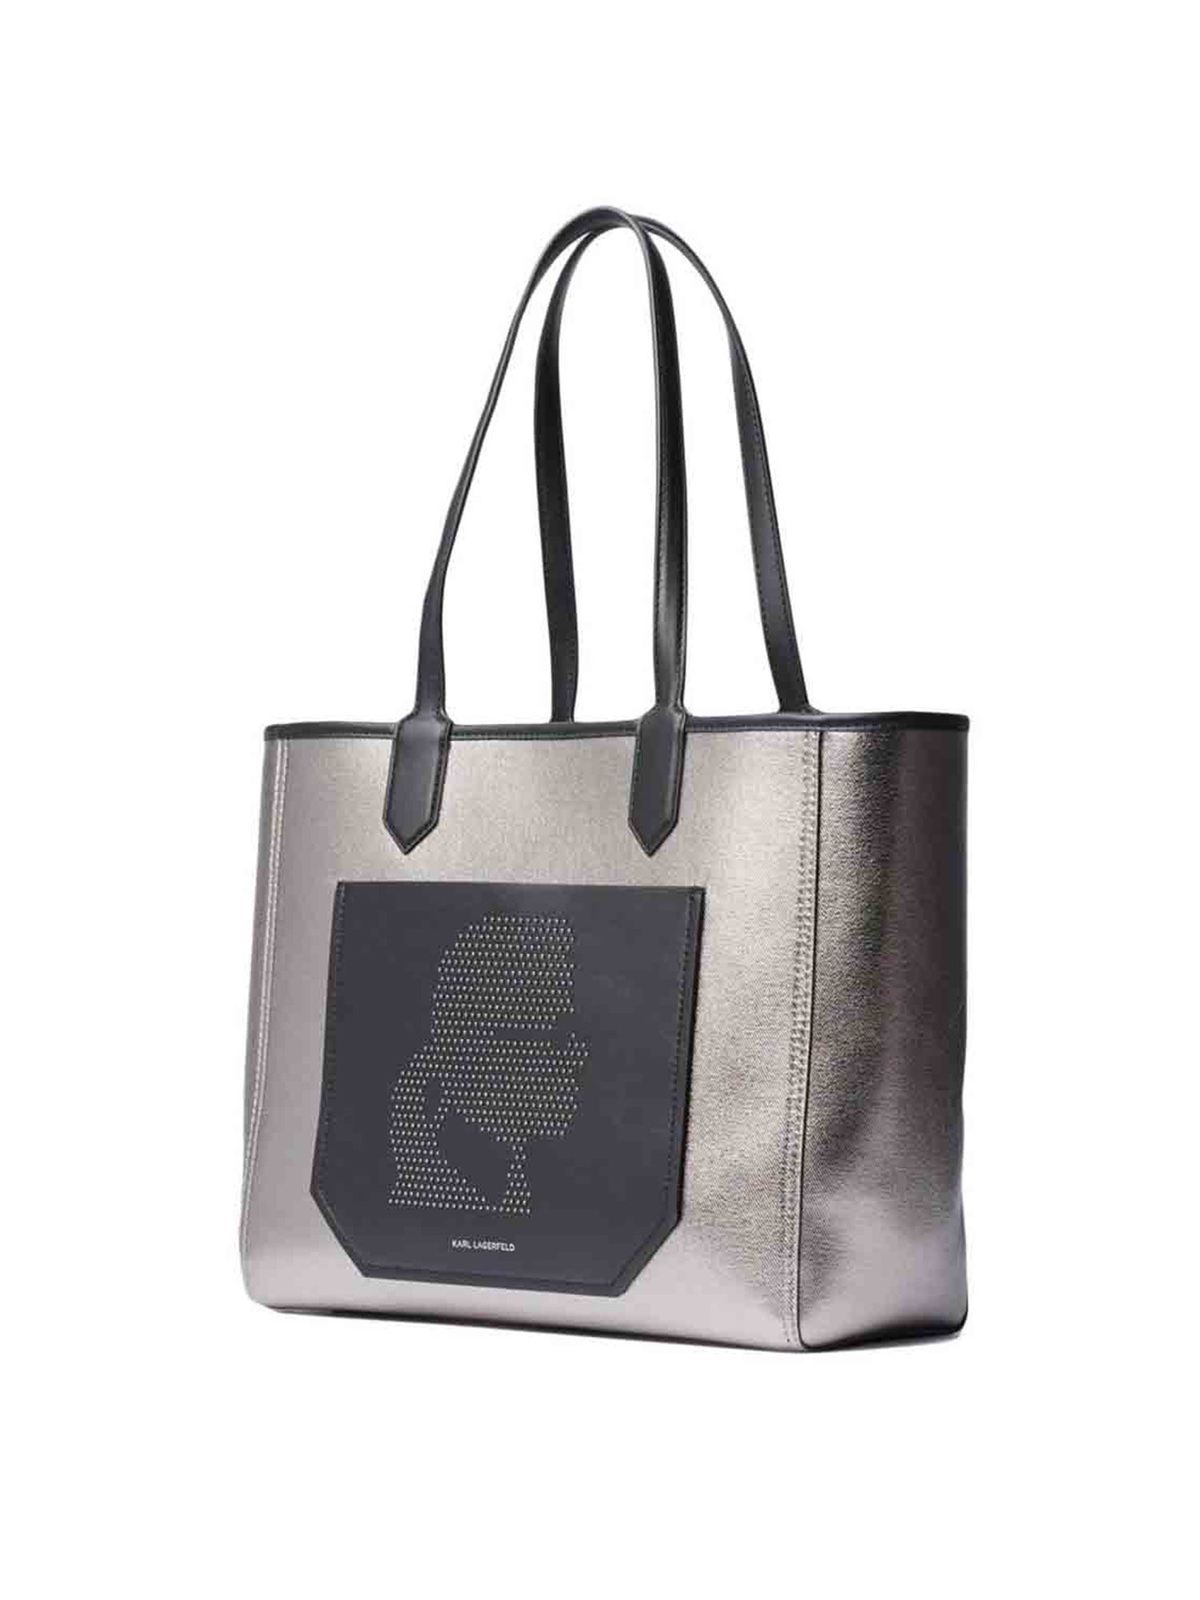 Top more than 84 karl lagerfeld black tote bag - in.cdgdbentre